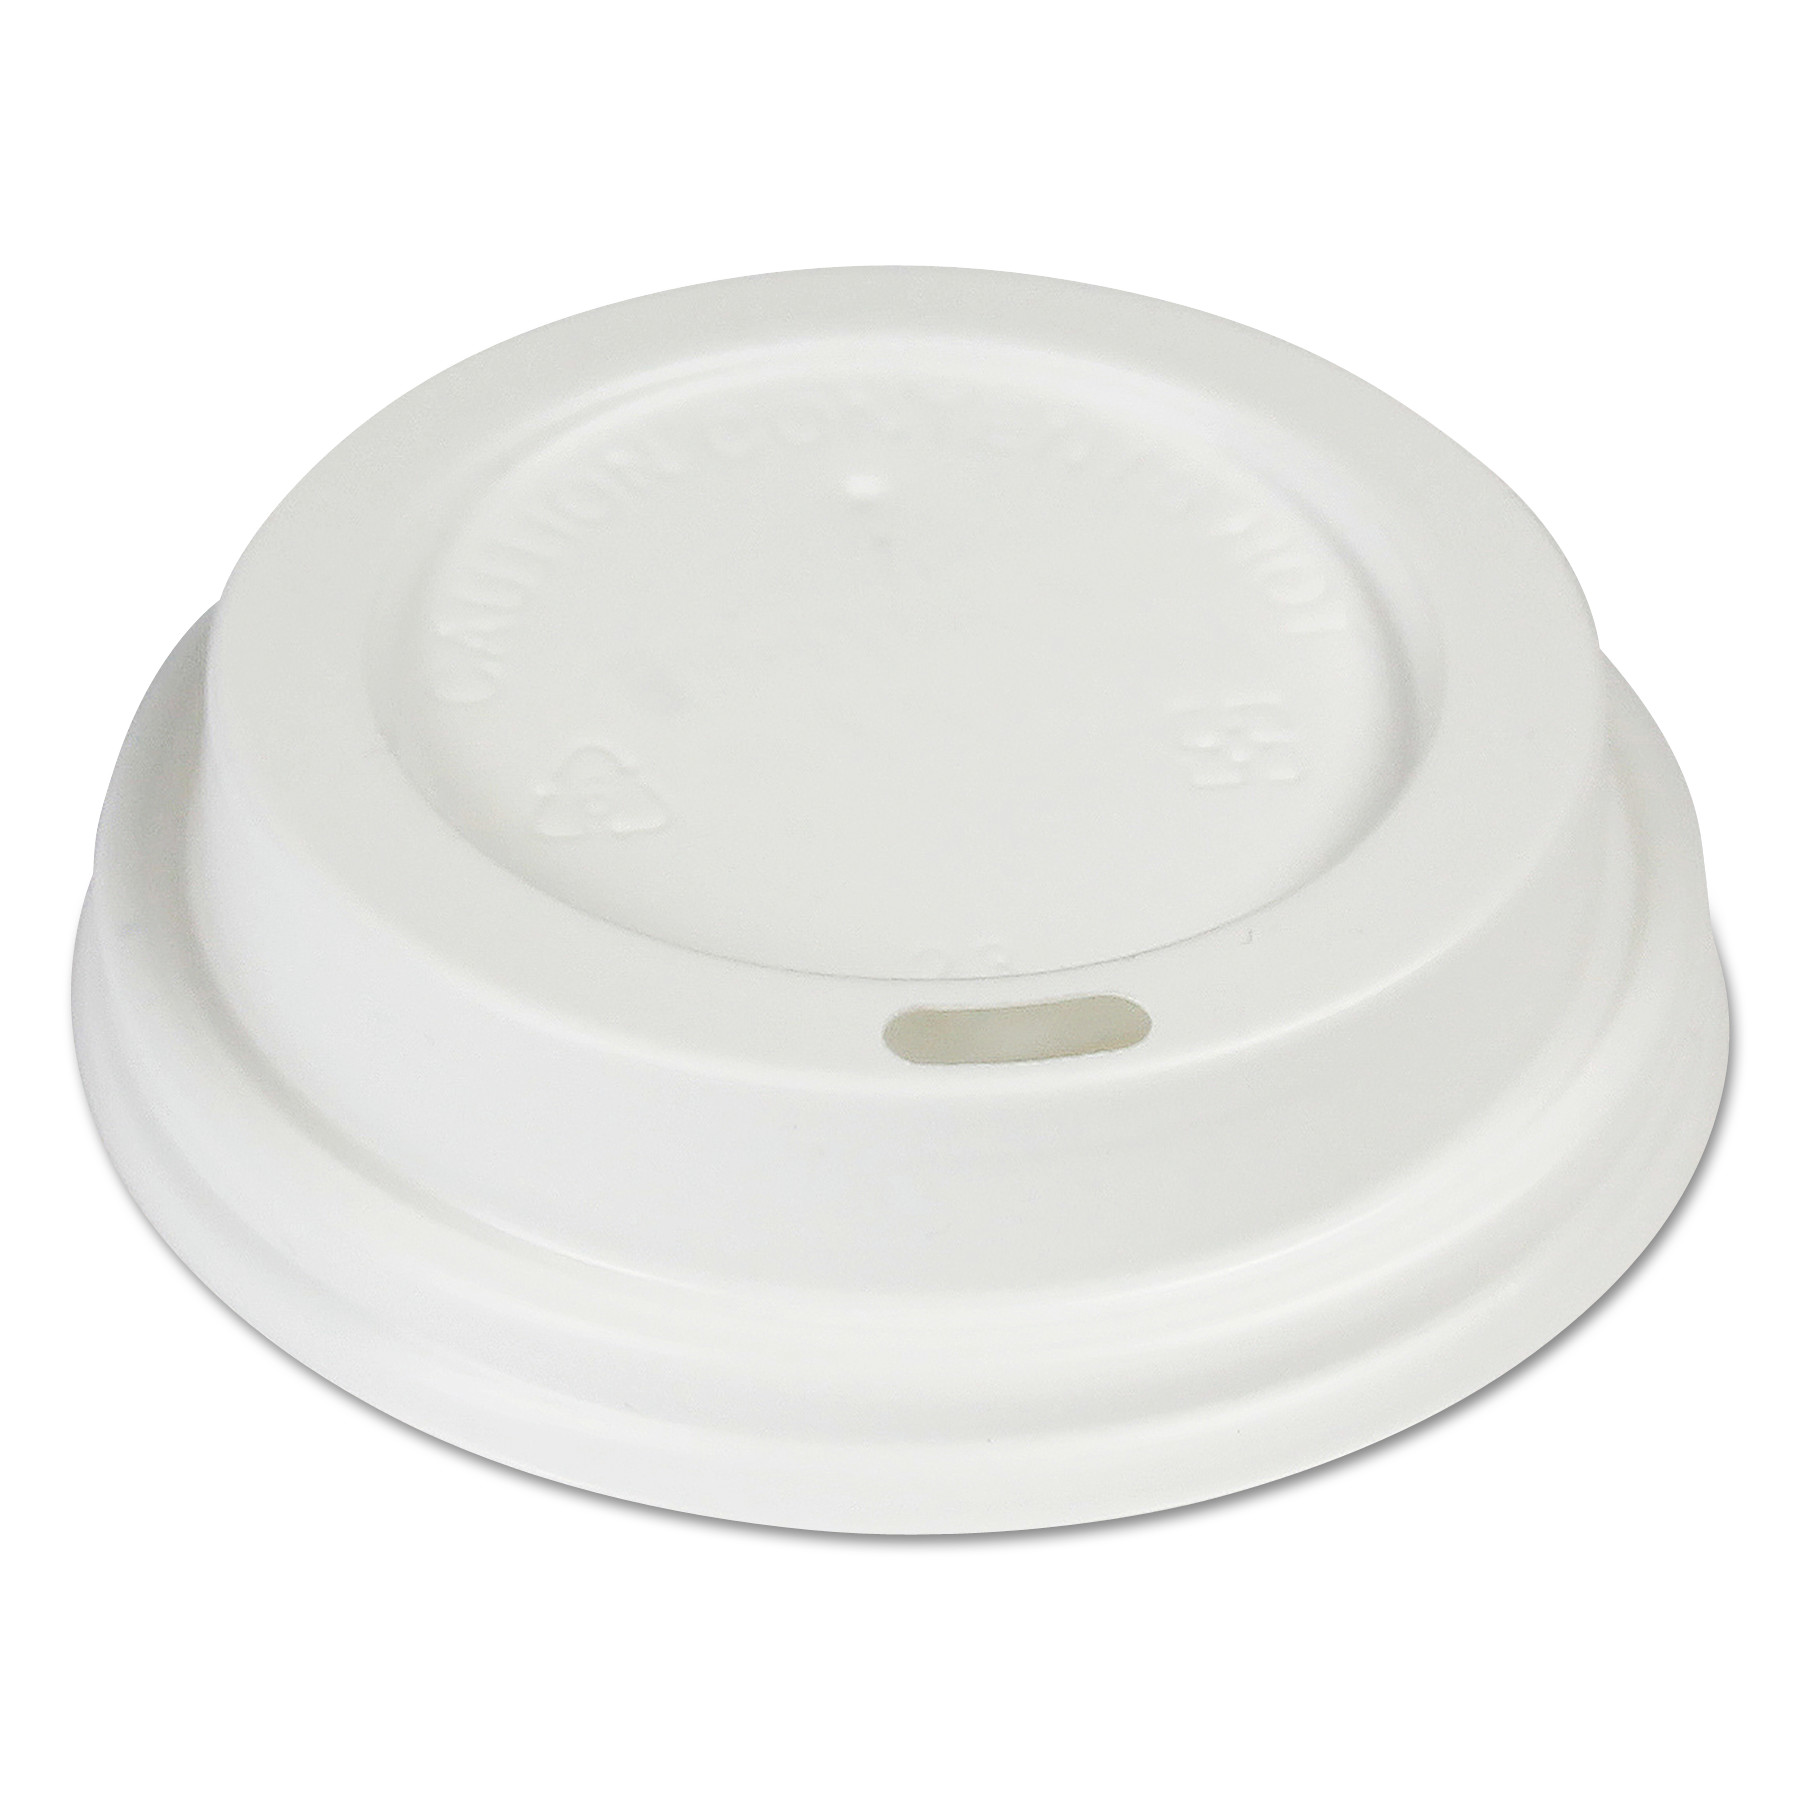 Hot Cup Dome Lids, Fits 8 oz Hot Cups, White, 1000/Carton